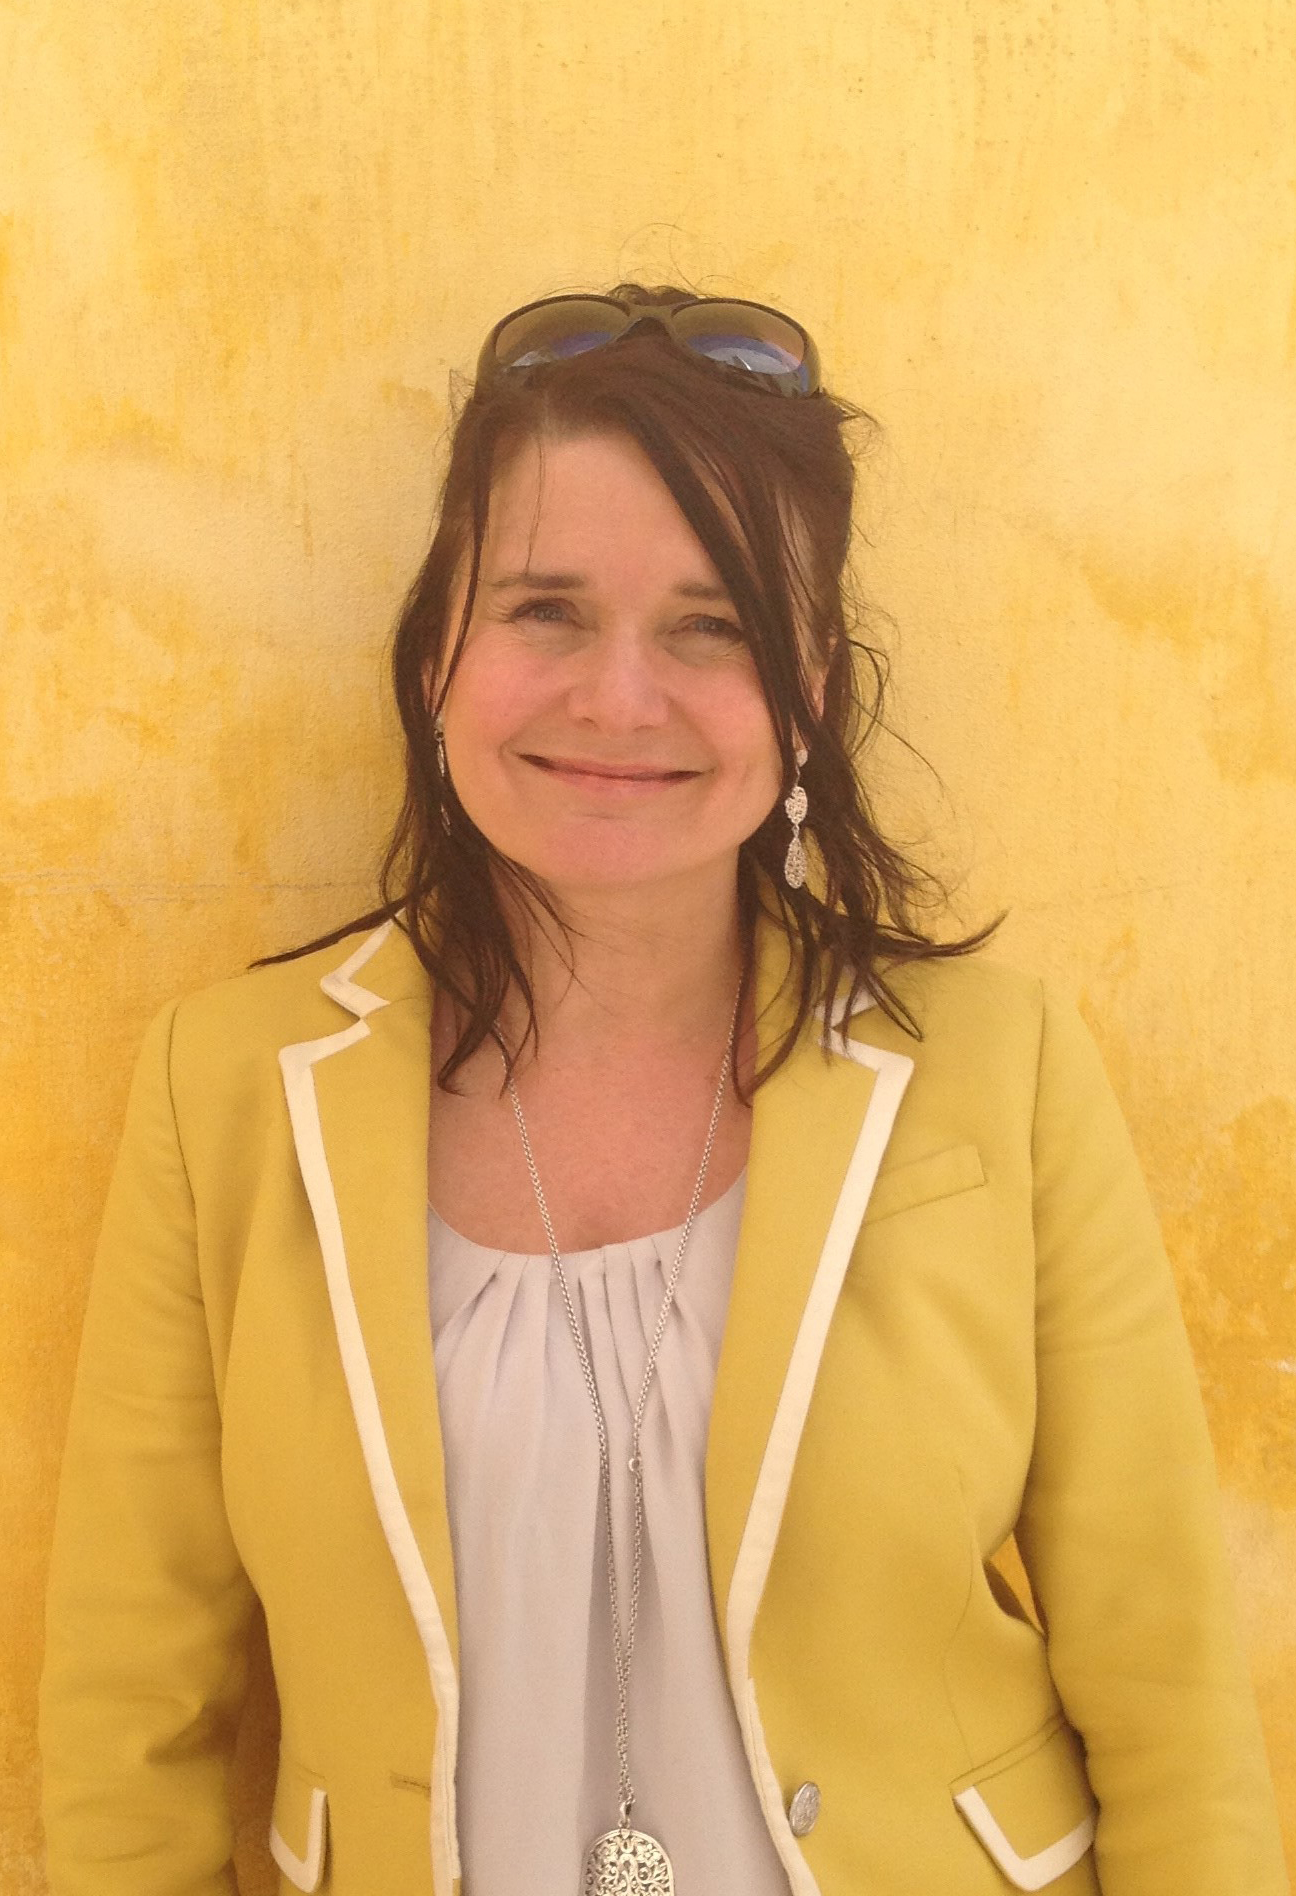 woman wearing yellow jacket and white top in front of a yellow wall